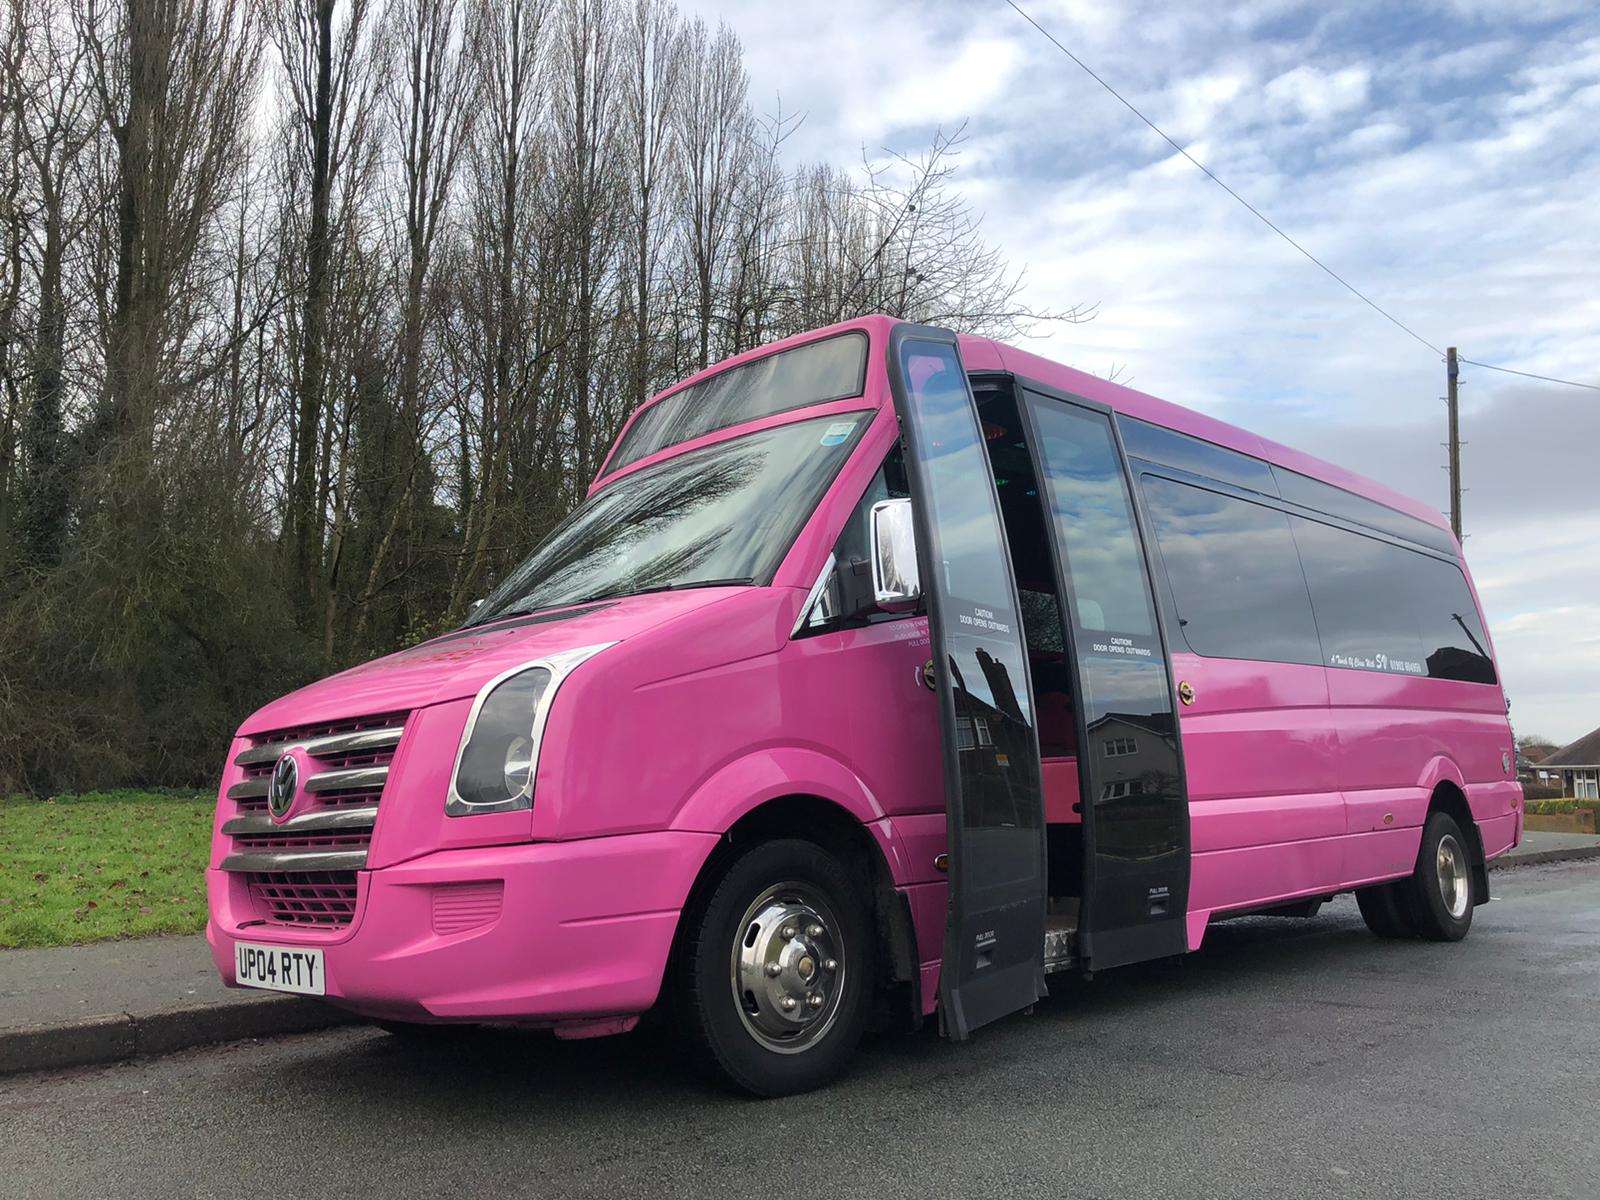 Maximising Fun on Wheels: Essential Tips for a Memorable South Wales Party Bus Experience